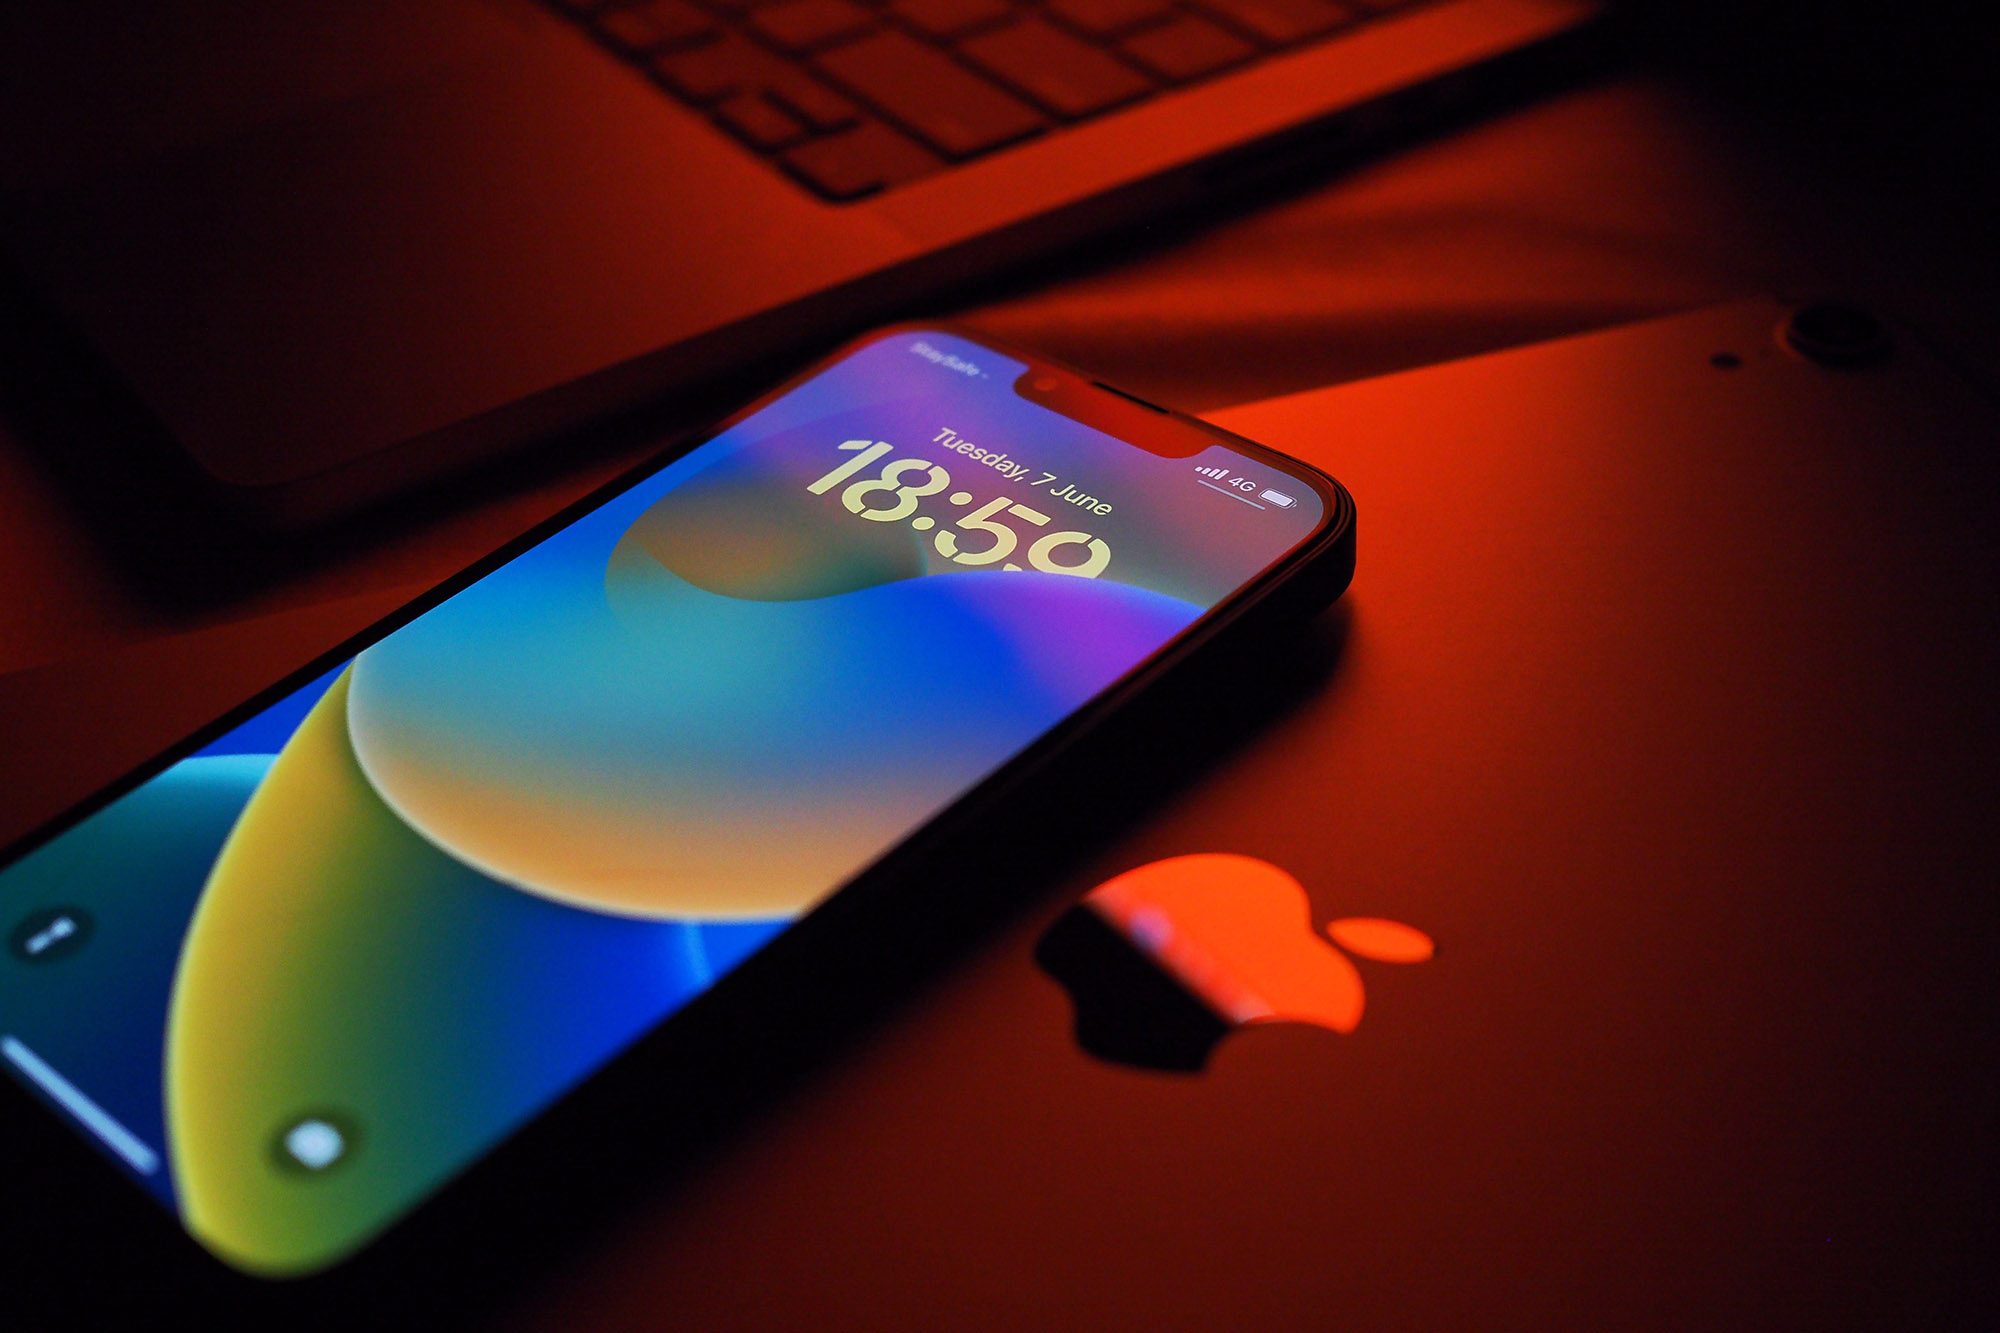 An iPhone 13 Pro running iOS 16 sits on top of an iPad with red lighting shining.